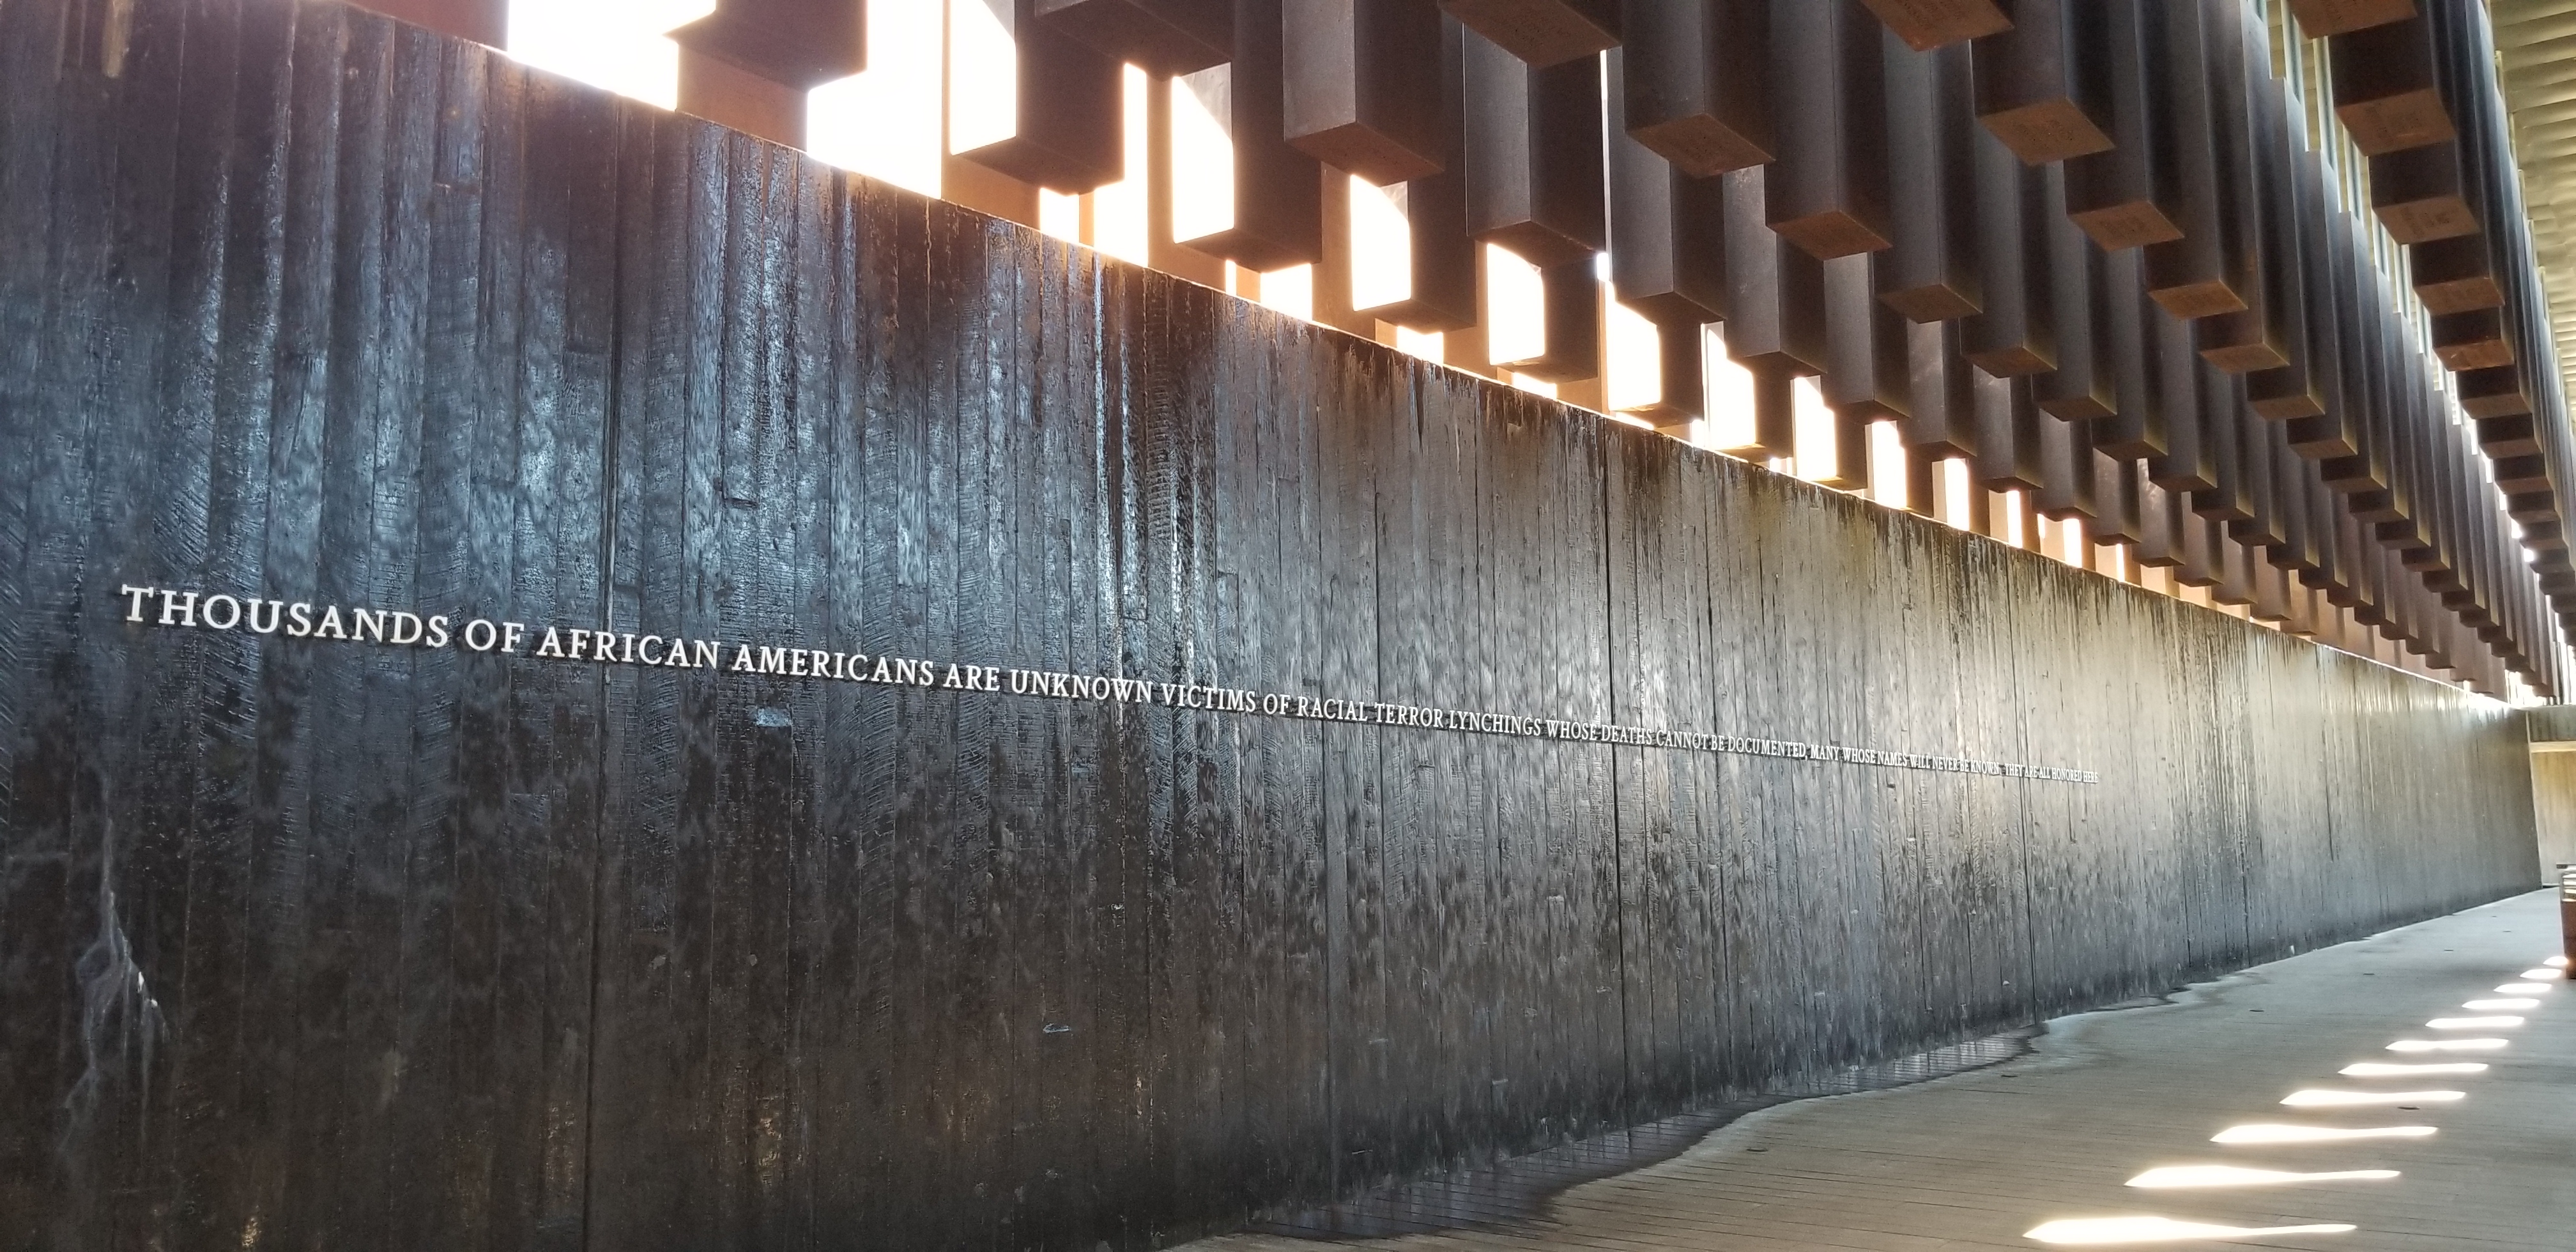 The National Memorial for Peace and Justice in Montgomery, Alabama